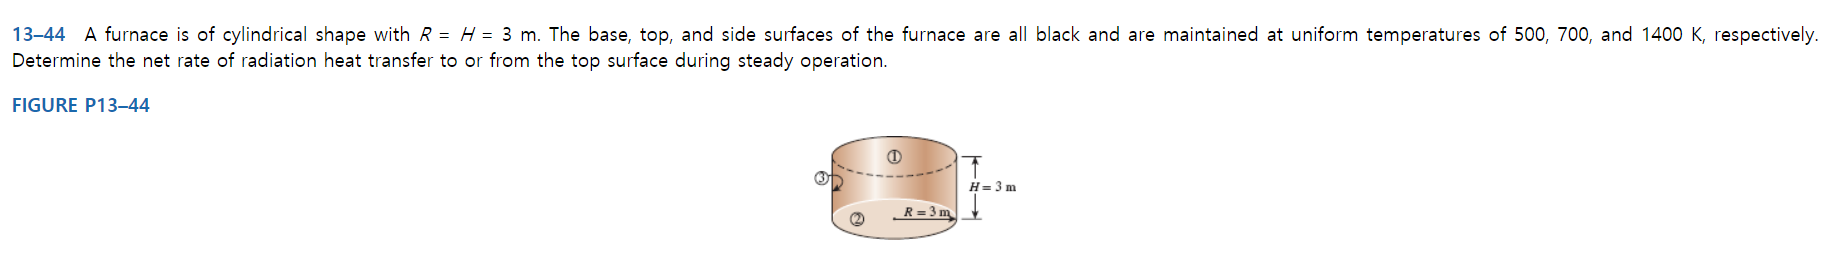 13-44 A furnace is of cylindrical shape with R = H = 3 m. The base, top, and side surfaces of the furnace are all black and are maintained at uniform temperatures of 500, 700, and 1400 K, respectively.
Determine the net rate of radiation heat transfer to or from the top surface during steady operation.
FIGURE P13–44
H= 3 m
R= 3 m
